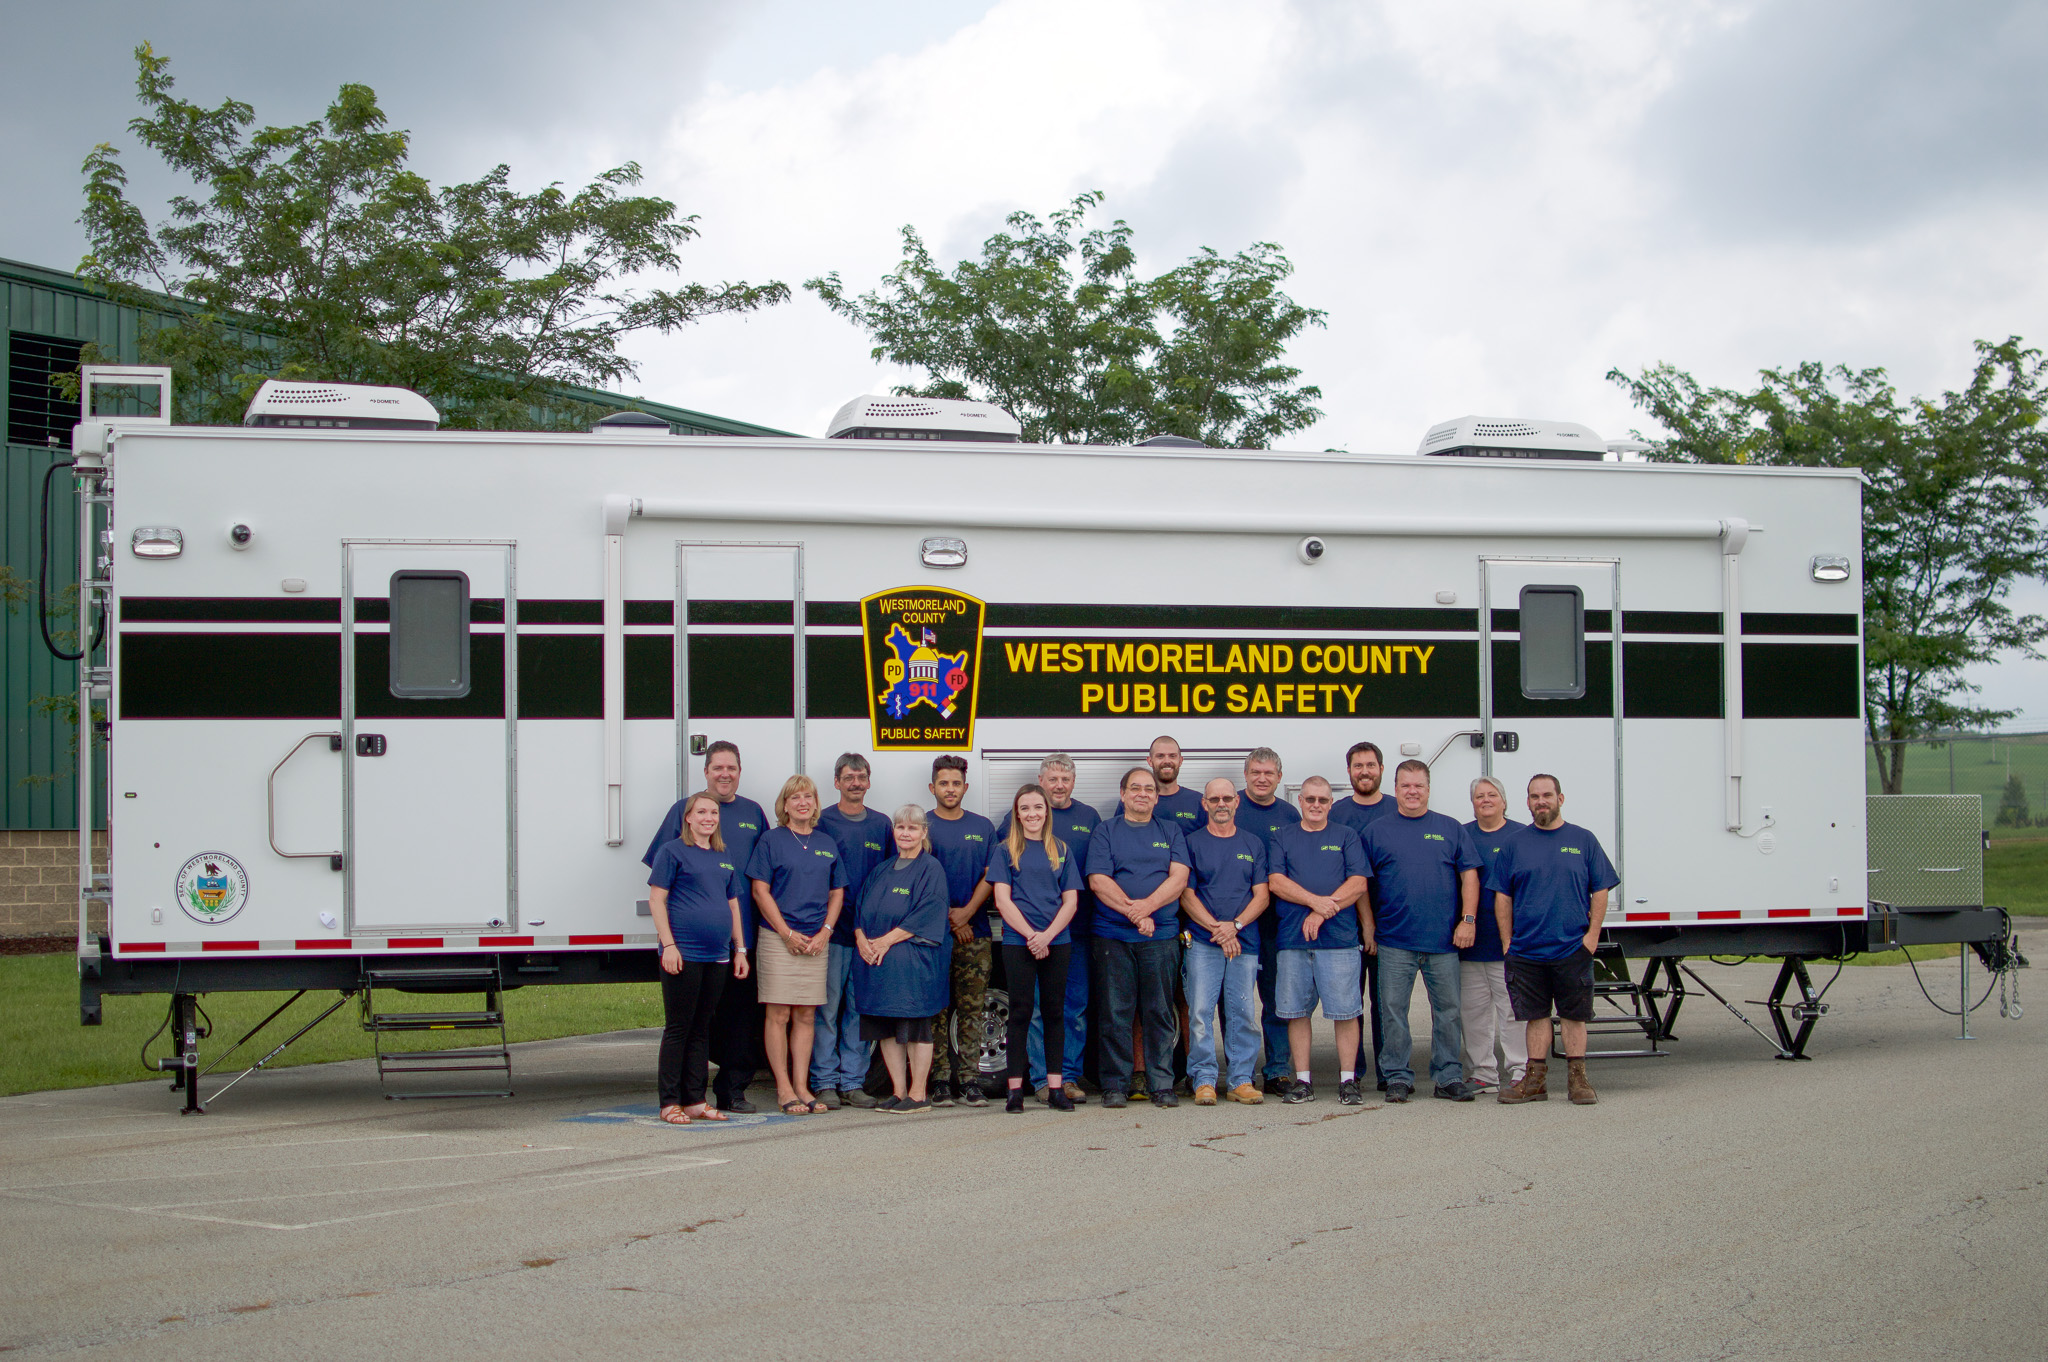 Westmoreland County Public Safety Staff members standing in front of their new trailer.